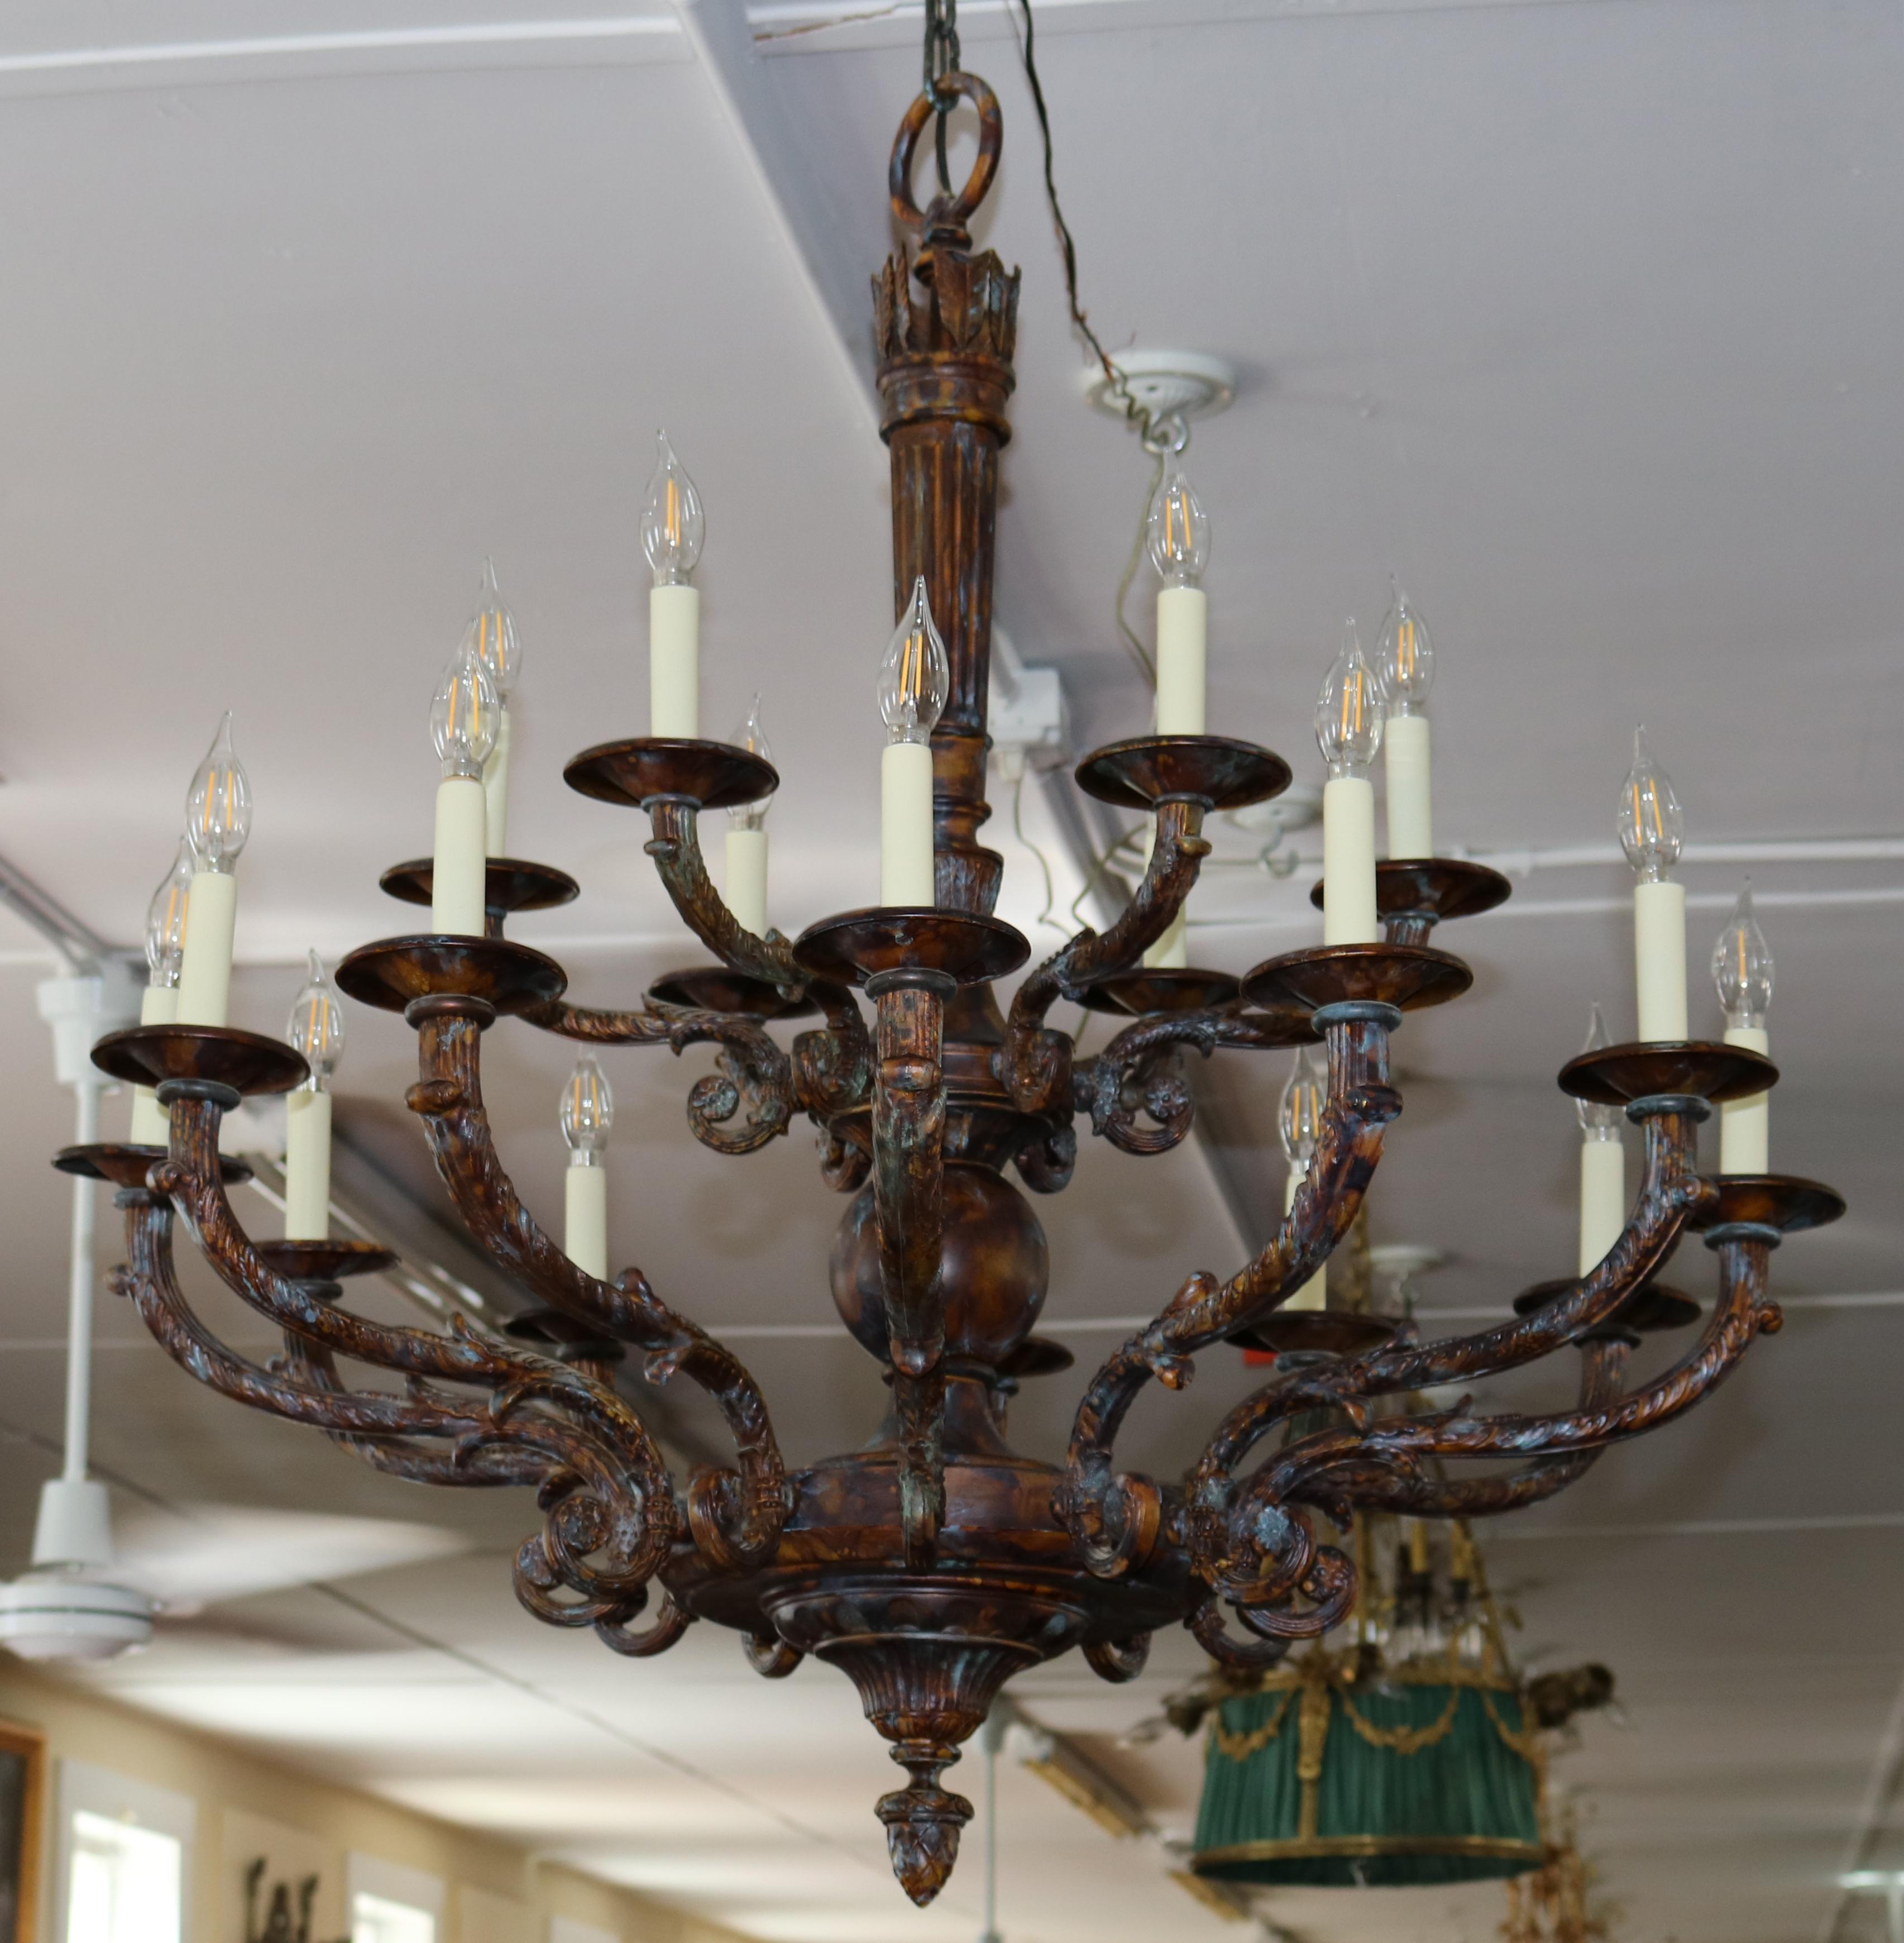 ​French Style Bronze 18 Light Chandelier By Mariner Model 18430 Royal Heritage

Dimensions : 42